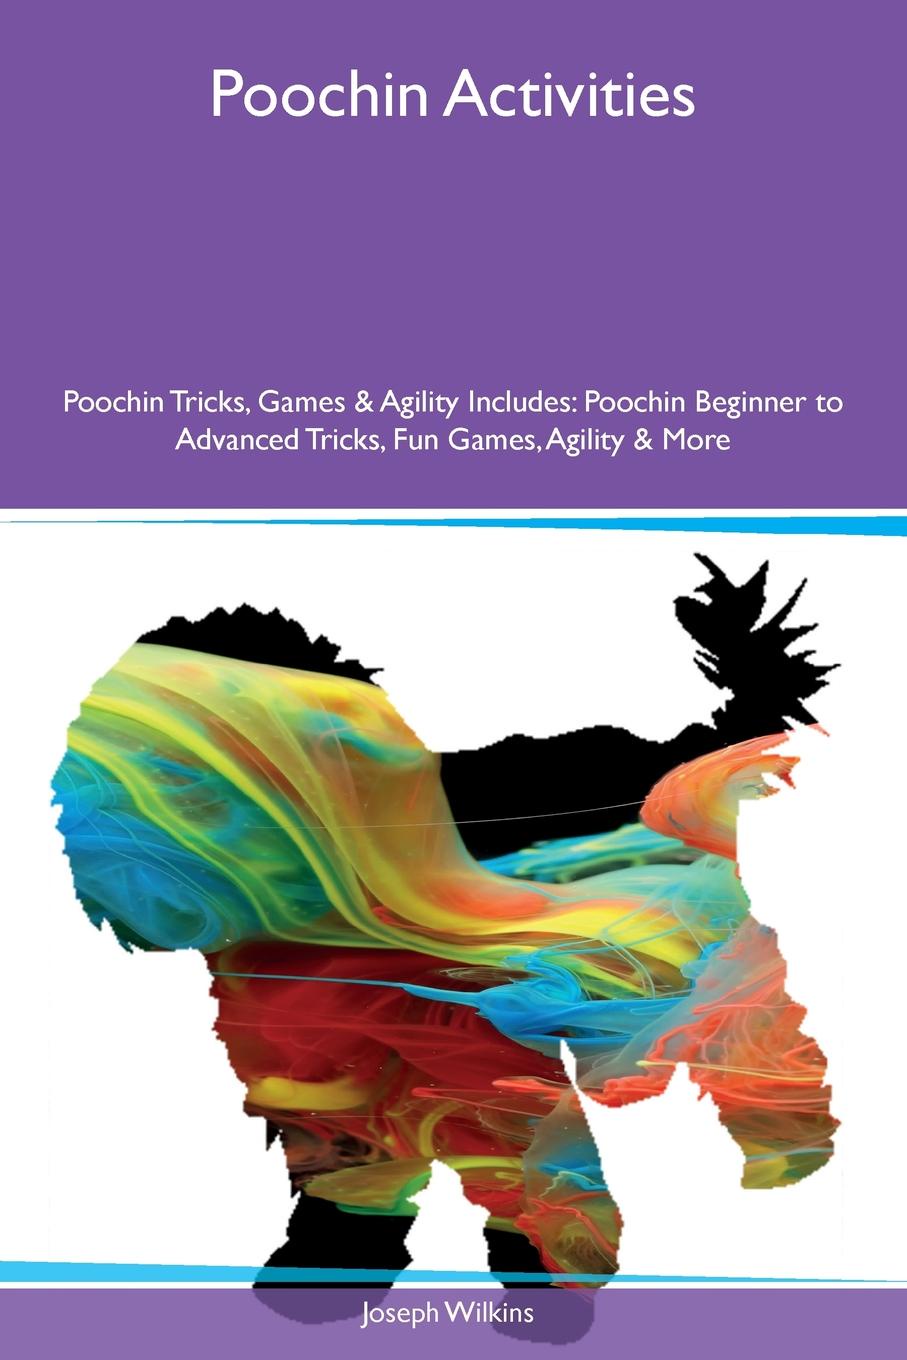 Poochin Activities Poochin Tricks, Games & Agility Includes. Poochin Beginner to Advanced Tricks, Fun Games, Agility & More